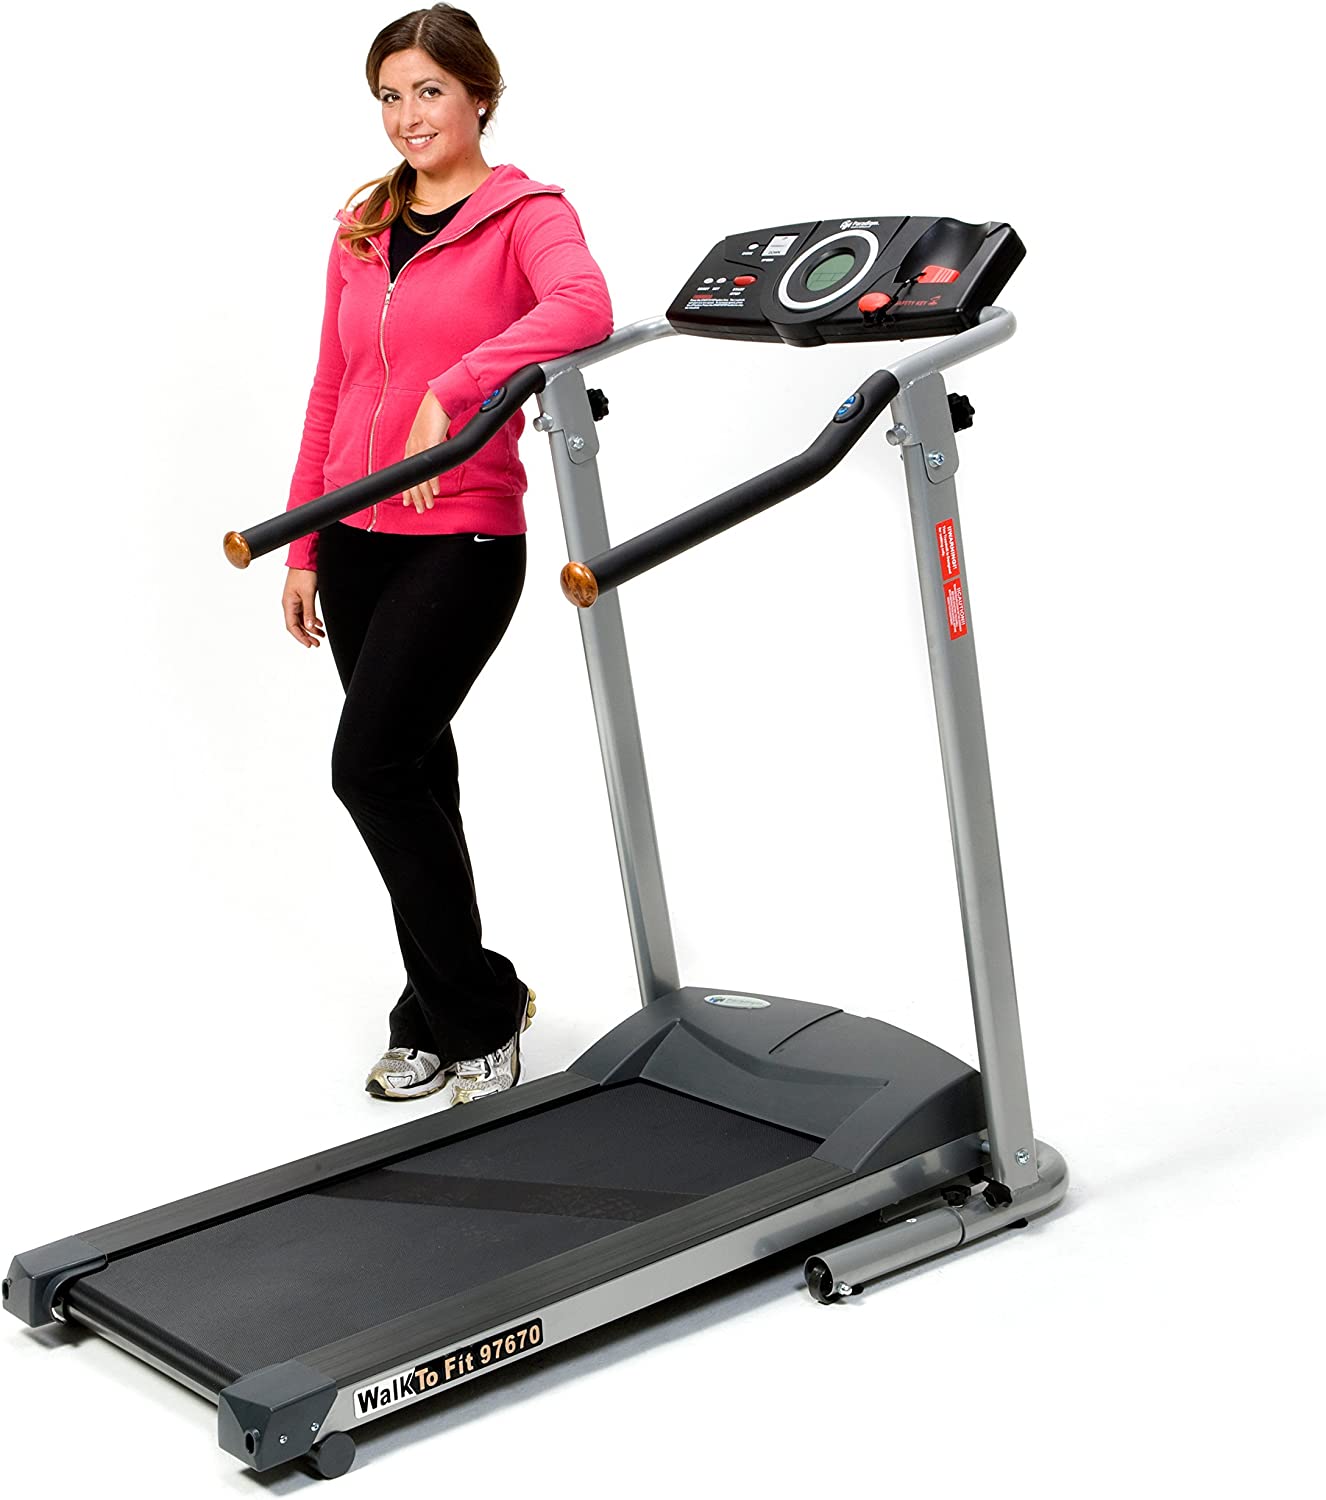 Exerpeutic TF900 – Best Budget Option (350 Pound Capacity)